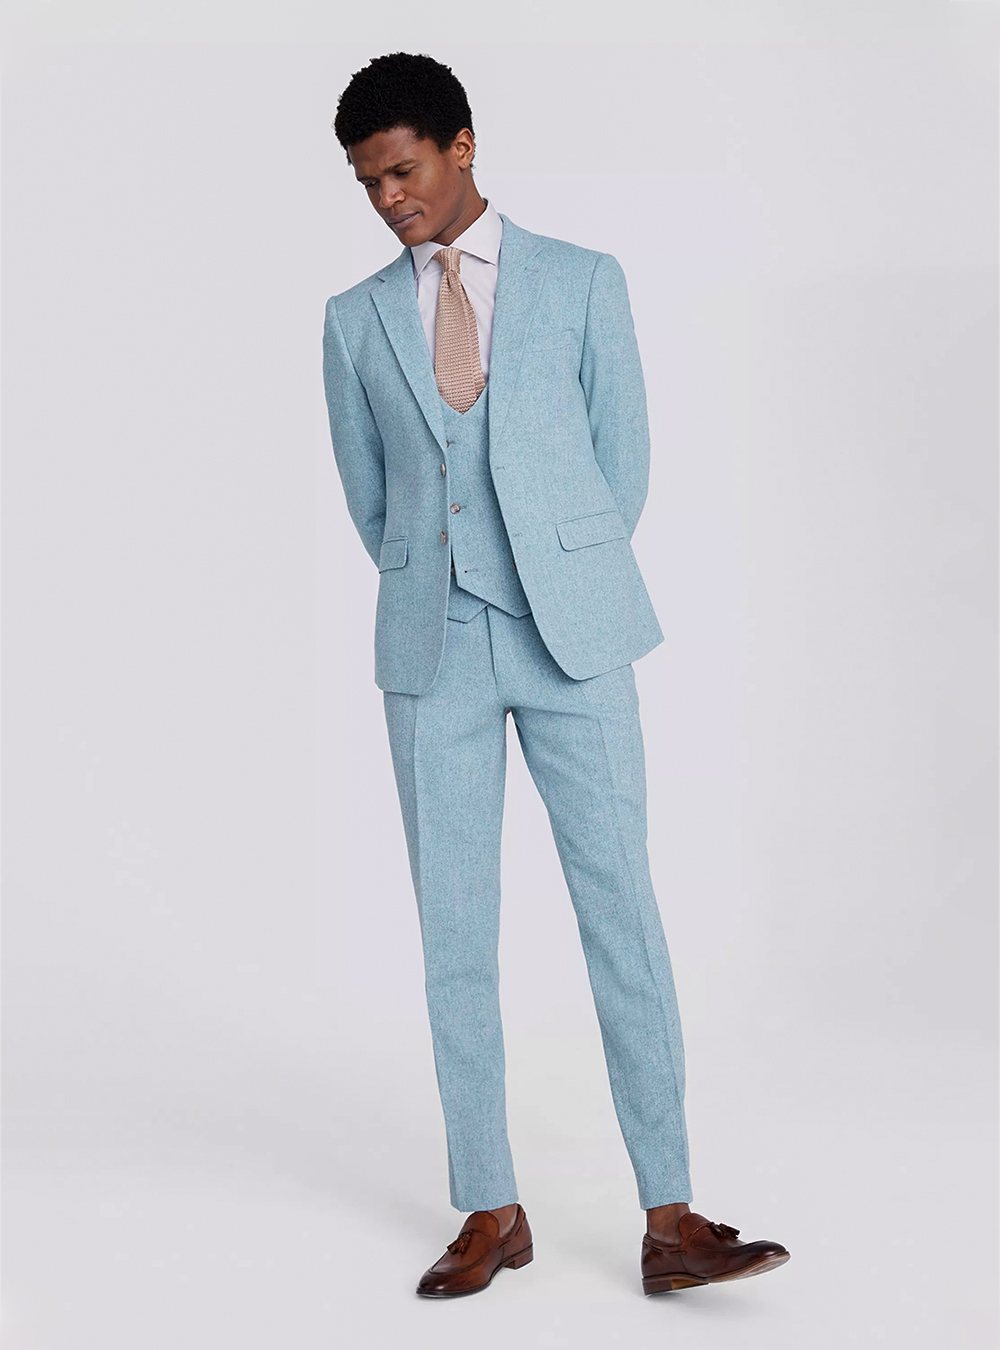 Blue Suit with Light Blue Dress Shirt Outfits (391 ideas & outfits